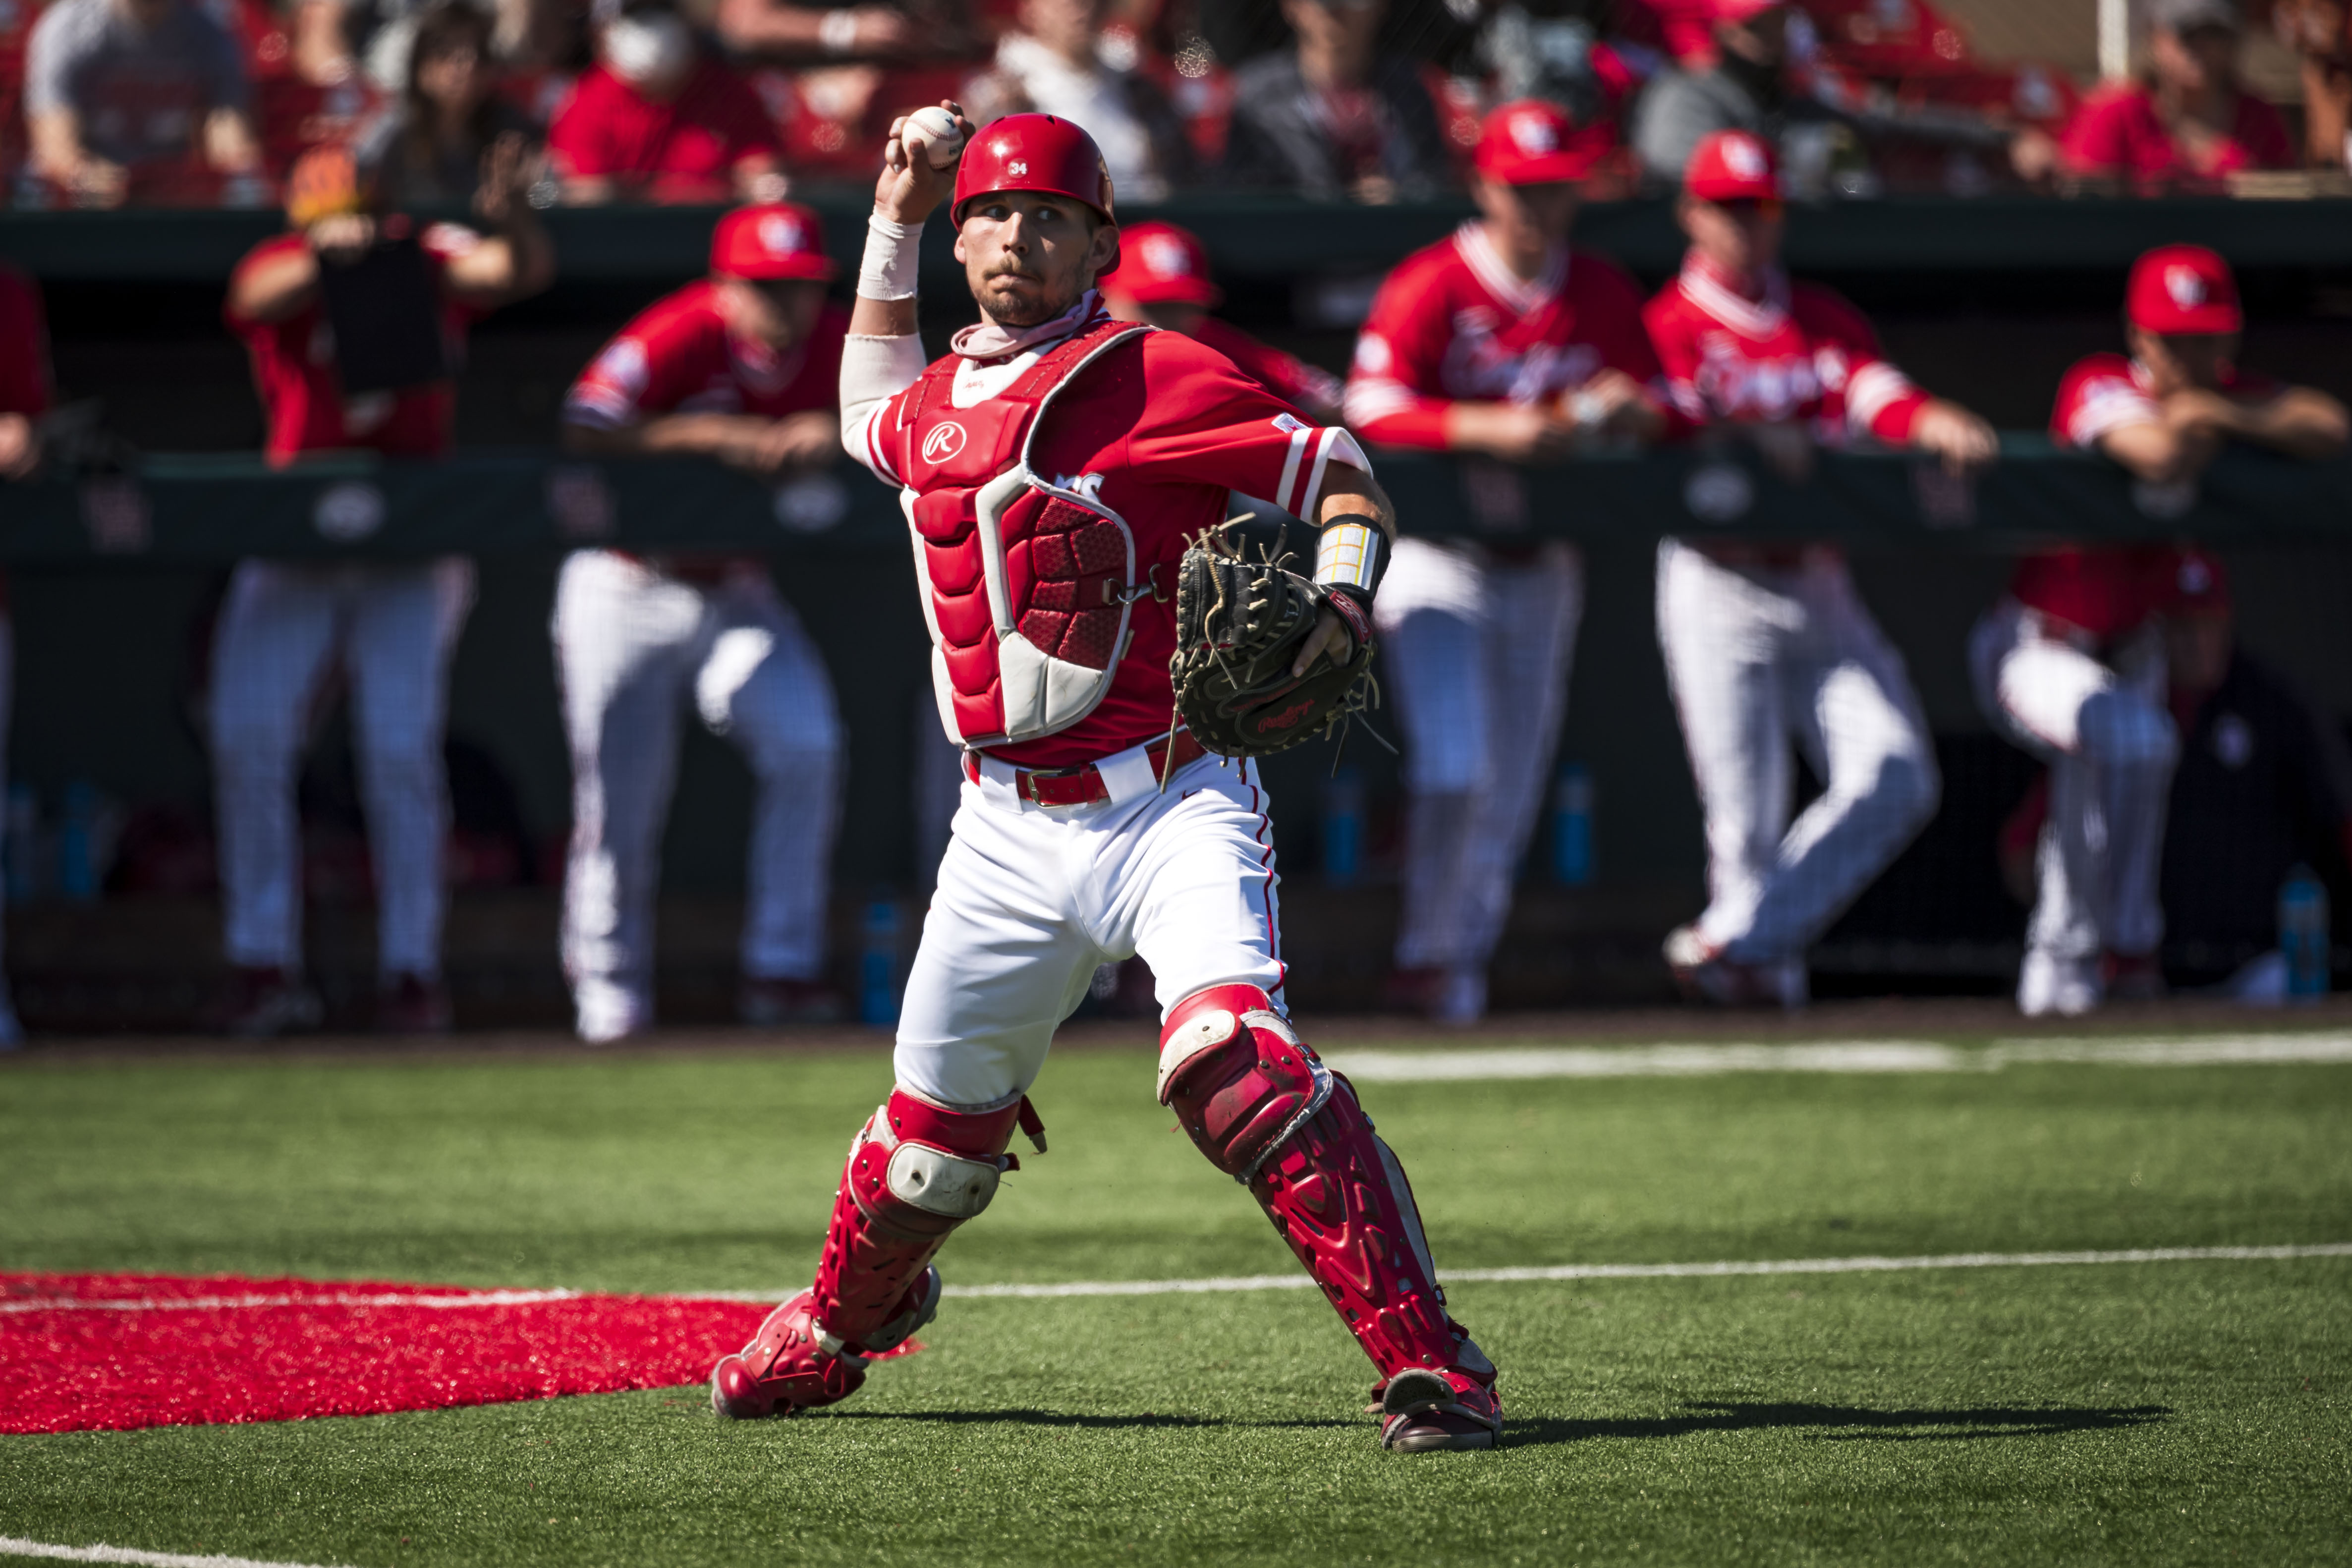 Junior catcher Kyle Lovelace has emerged as one of the top catchers in the country, being named to Buster Posey National Collegiate Catcher of the Year Watch List | Courtesy of UH athletics